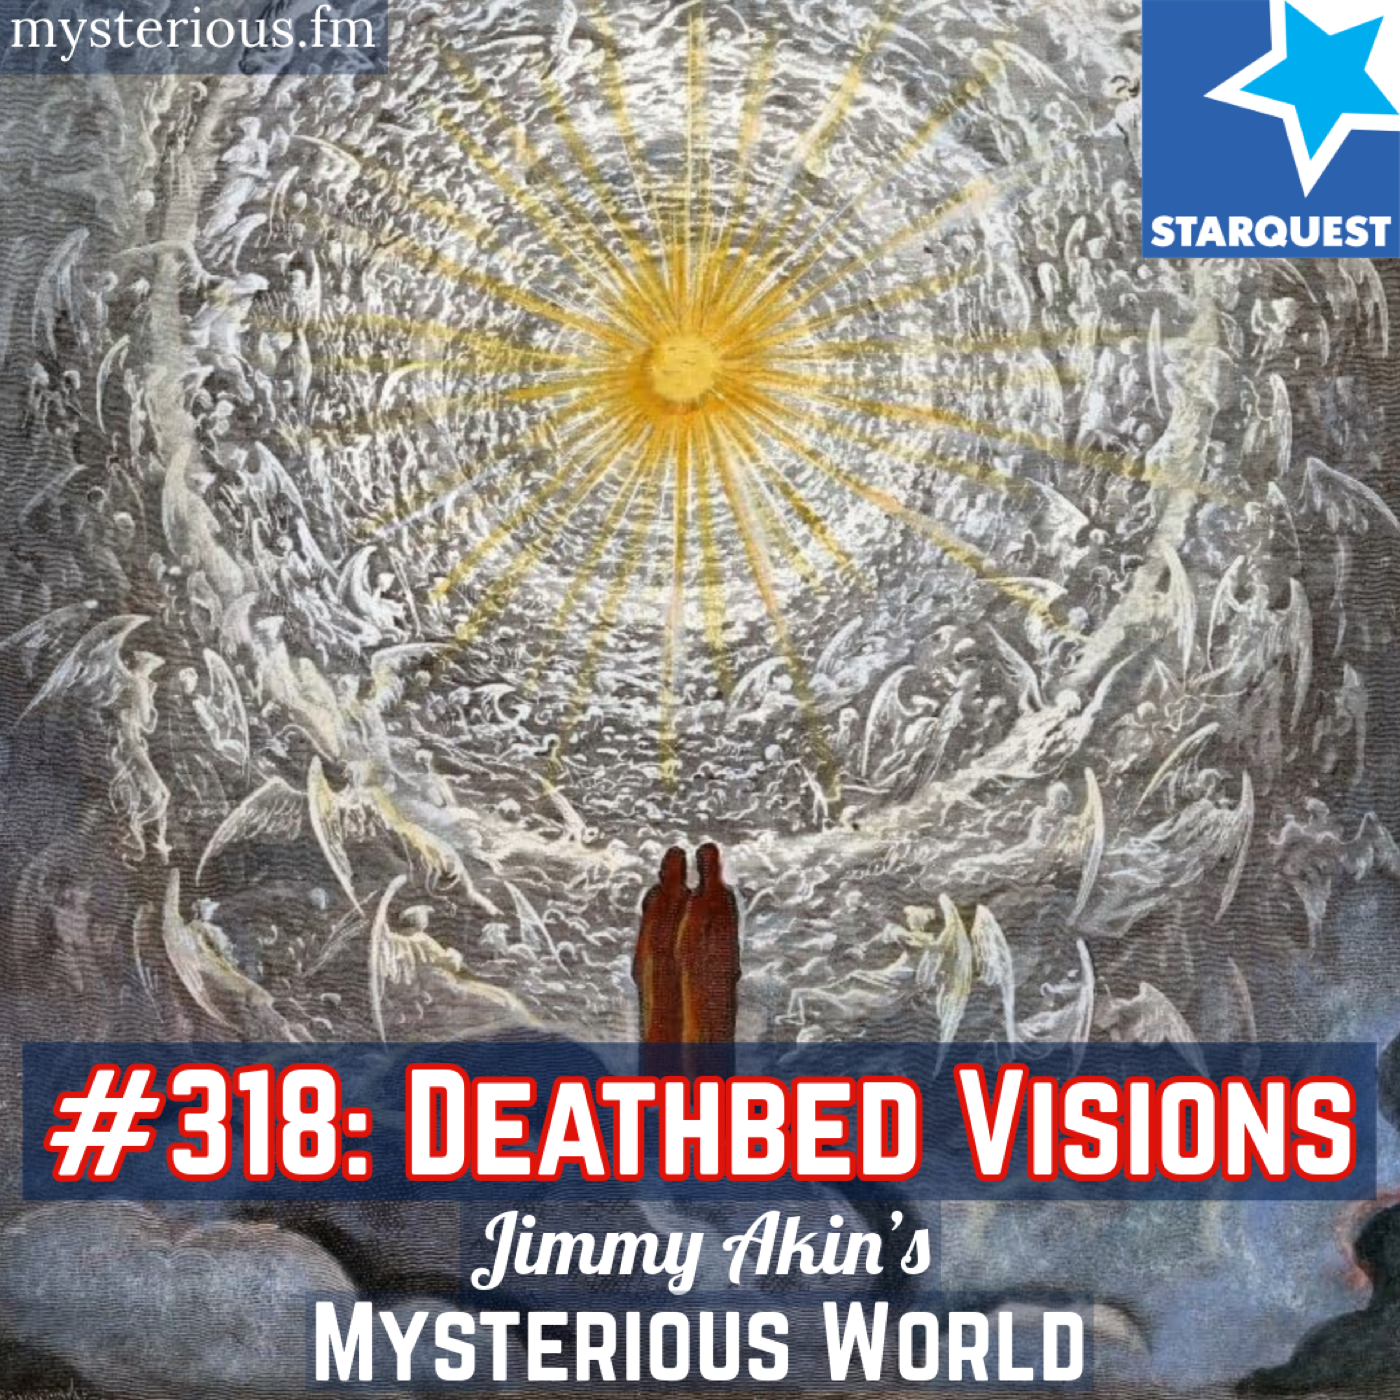 Deathbed Visions (Afterlife Research)